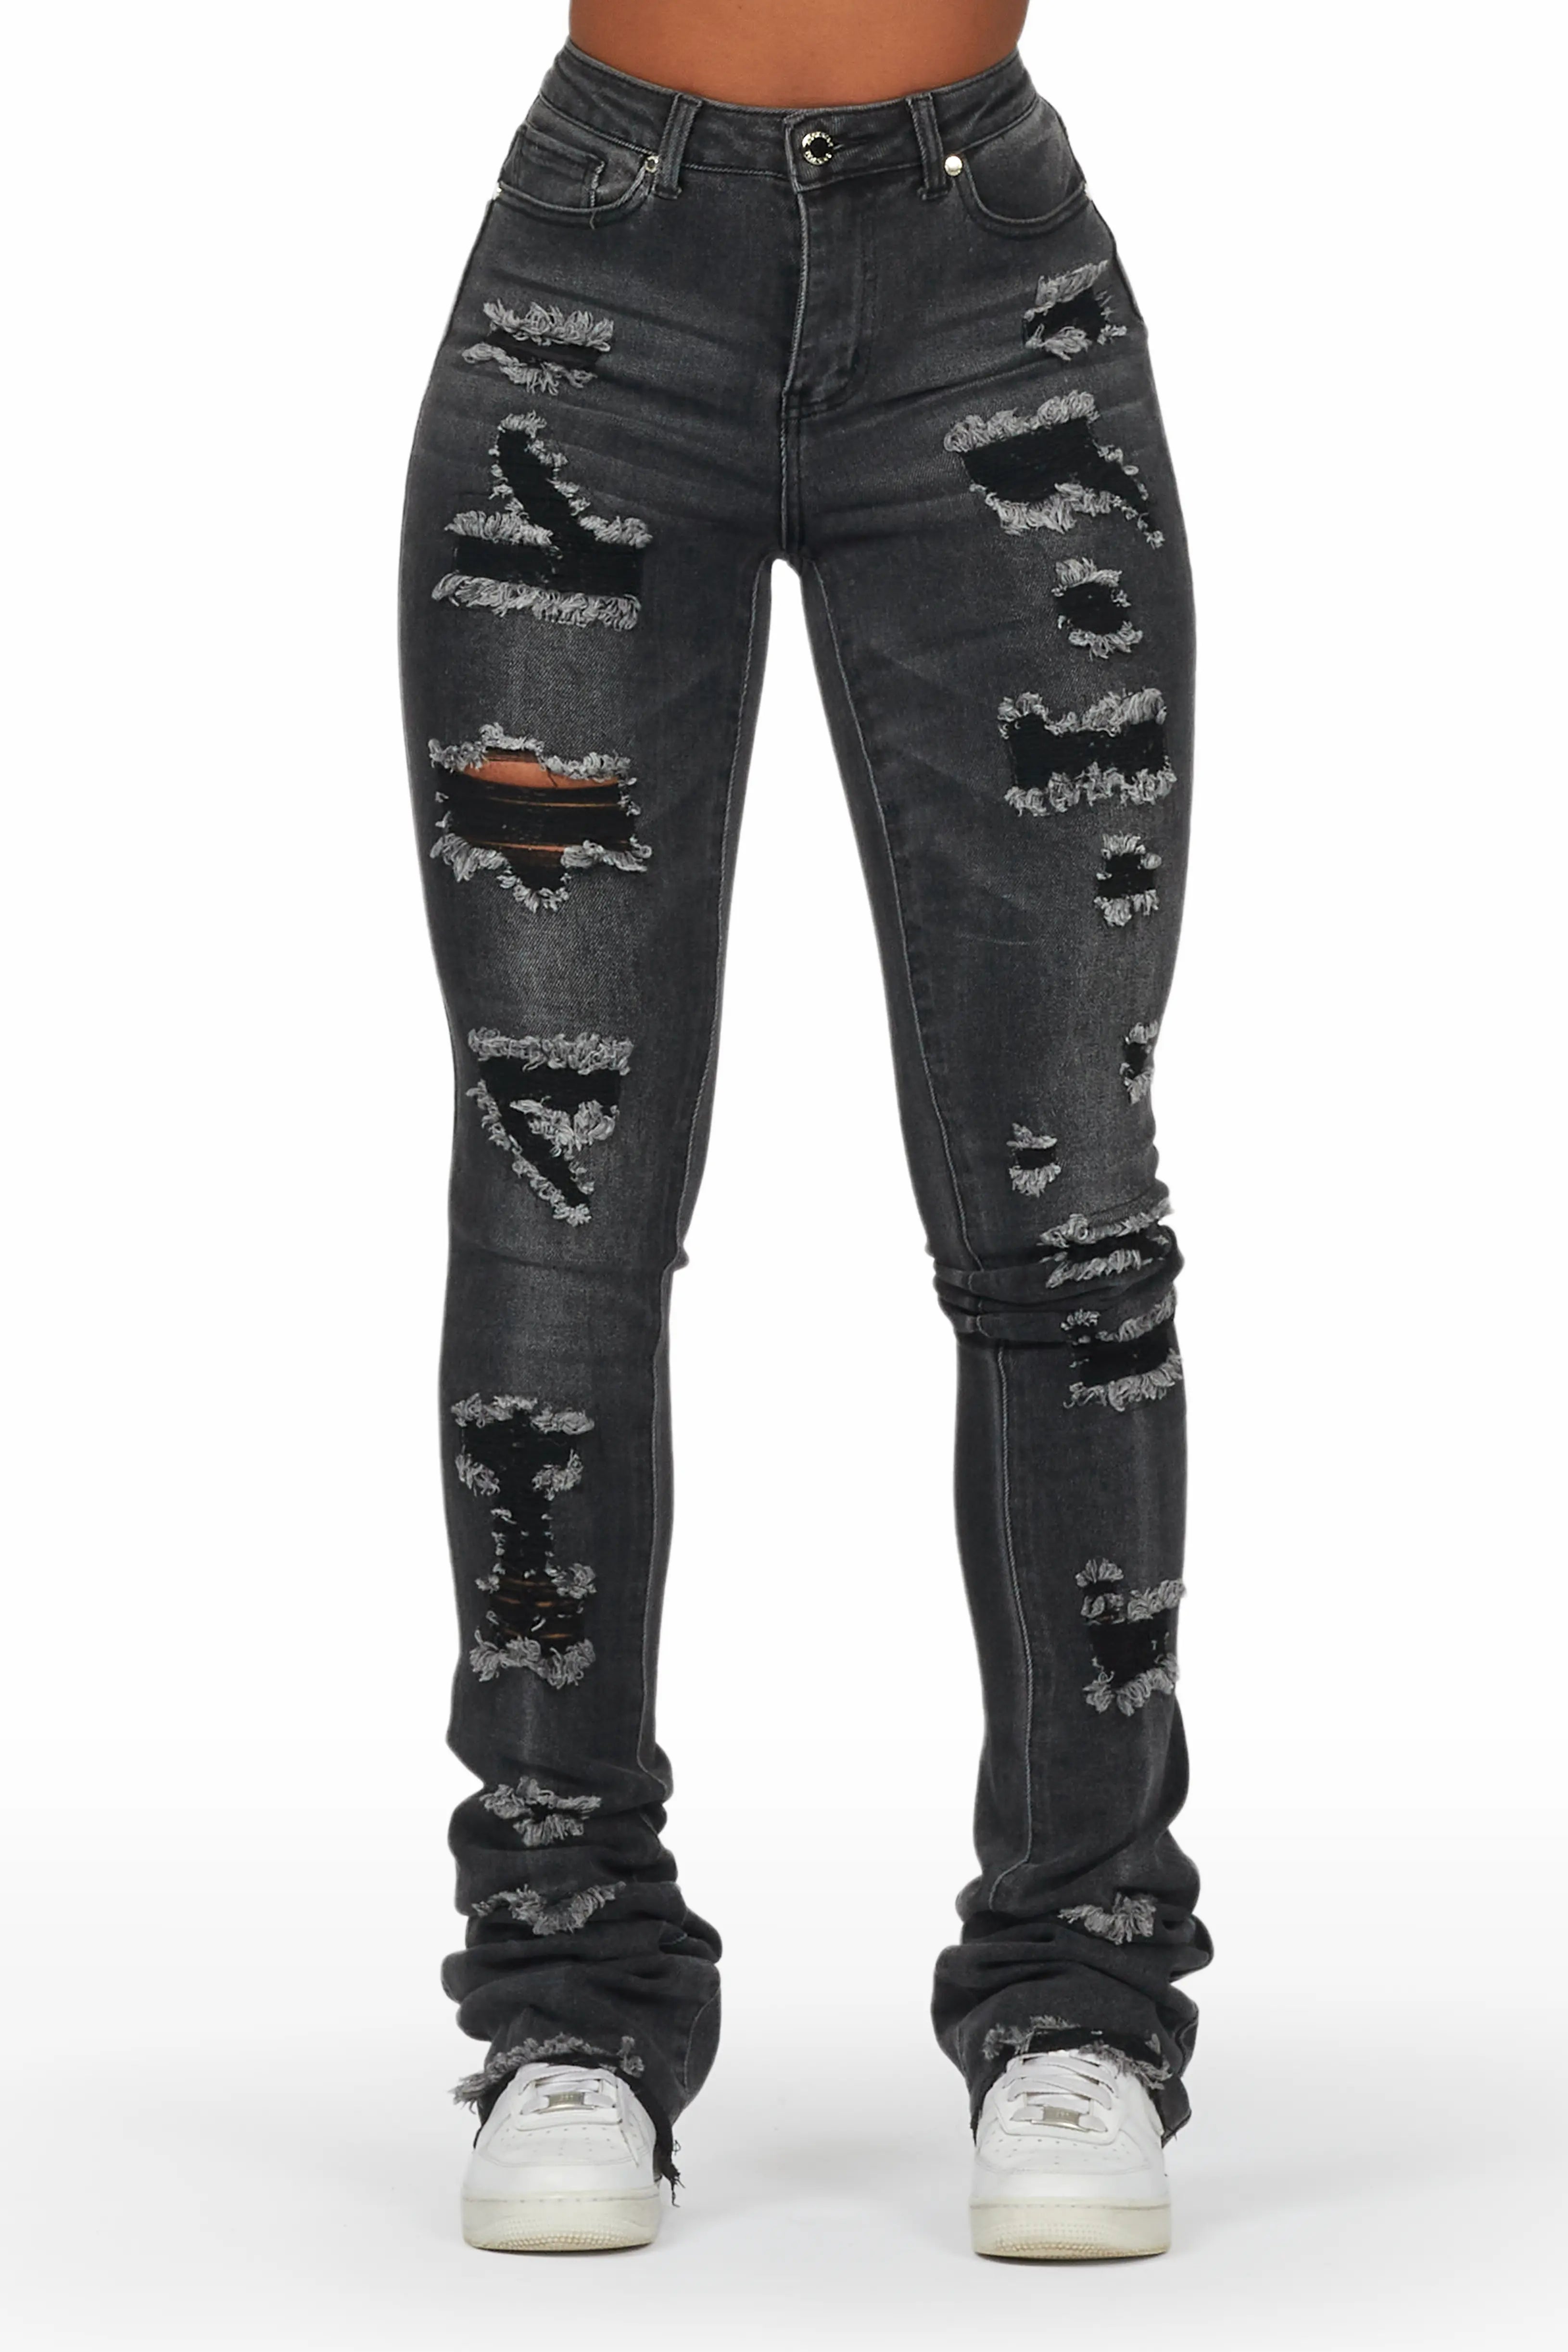 Remy Black Super Stacked Jean